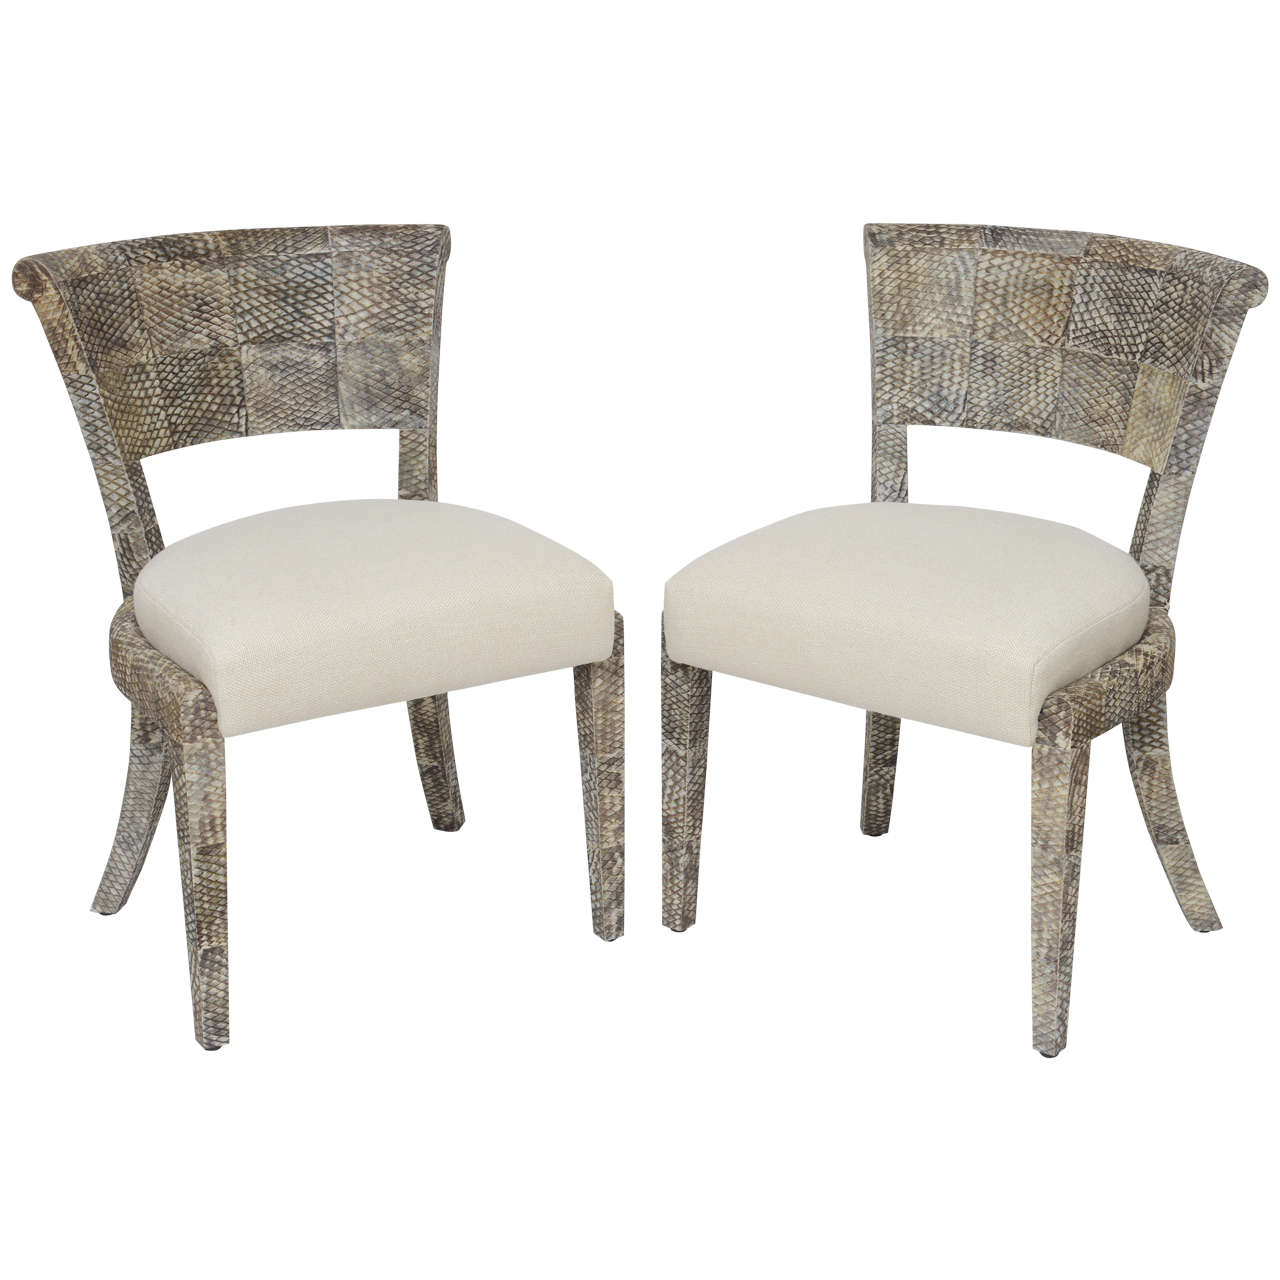 Matte Fishskin Chairs with Linen Upholstery For Sale